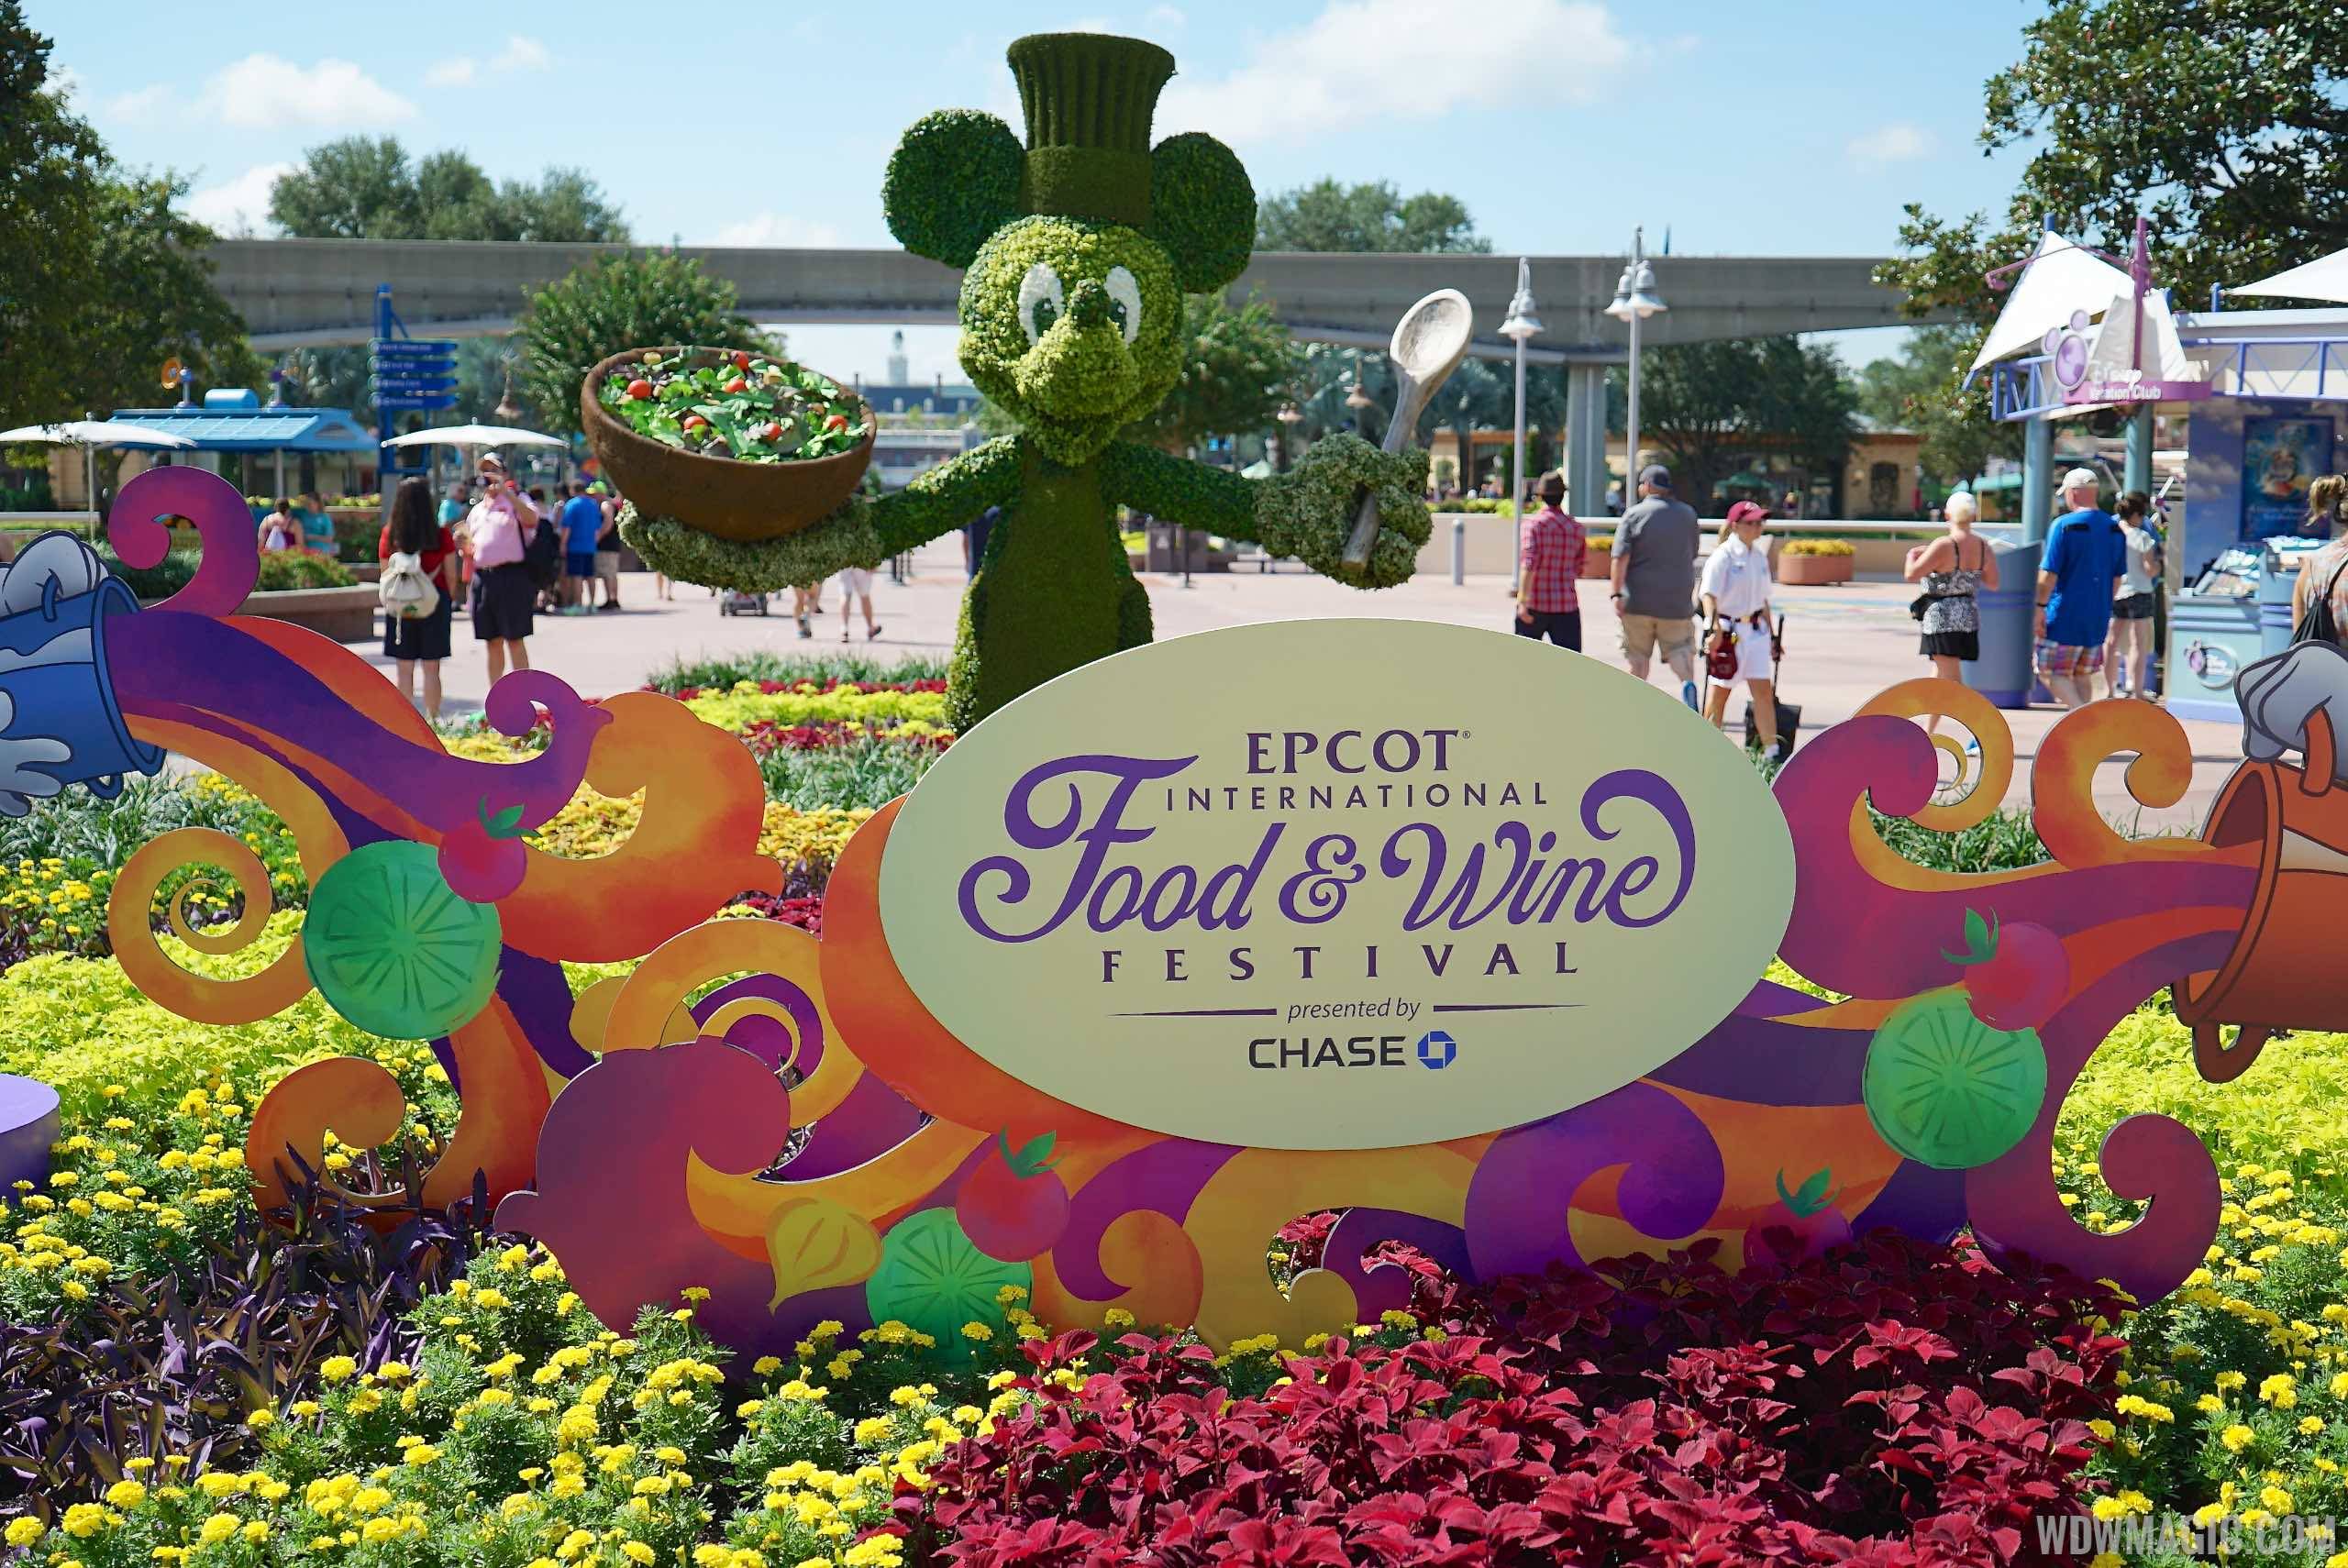 Epcot Food and Wine Festival overview